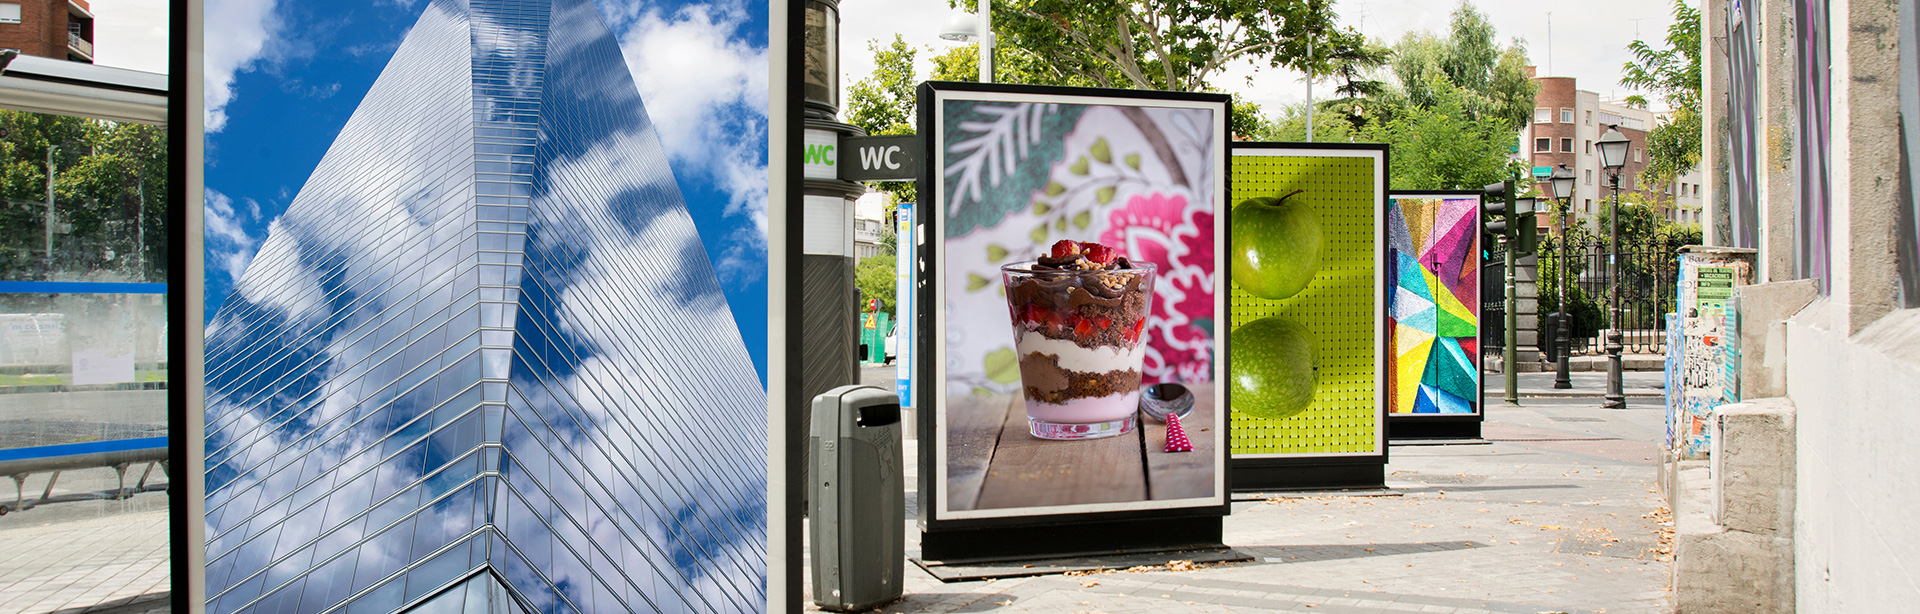 Revolutionizing Outdoor Advertising with Transit Shelters & Other Out of Home Campaigns